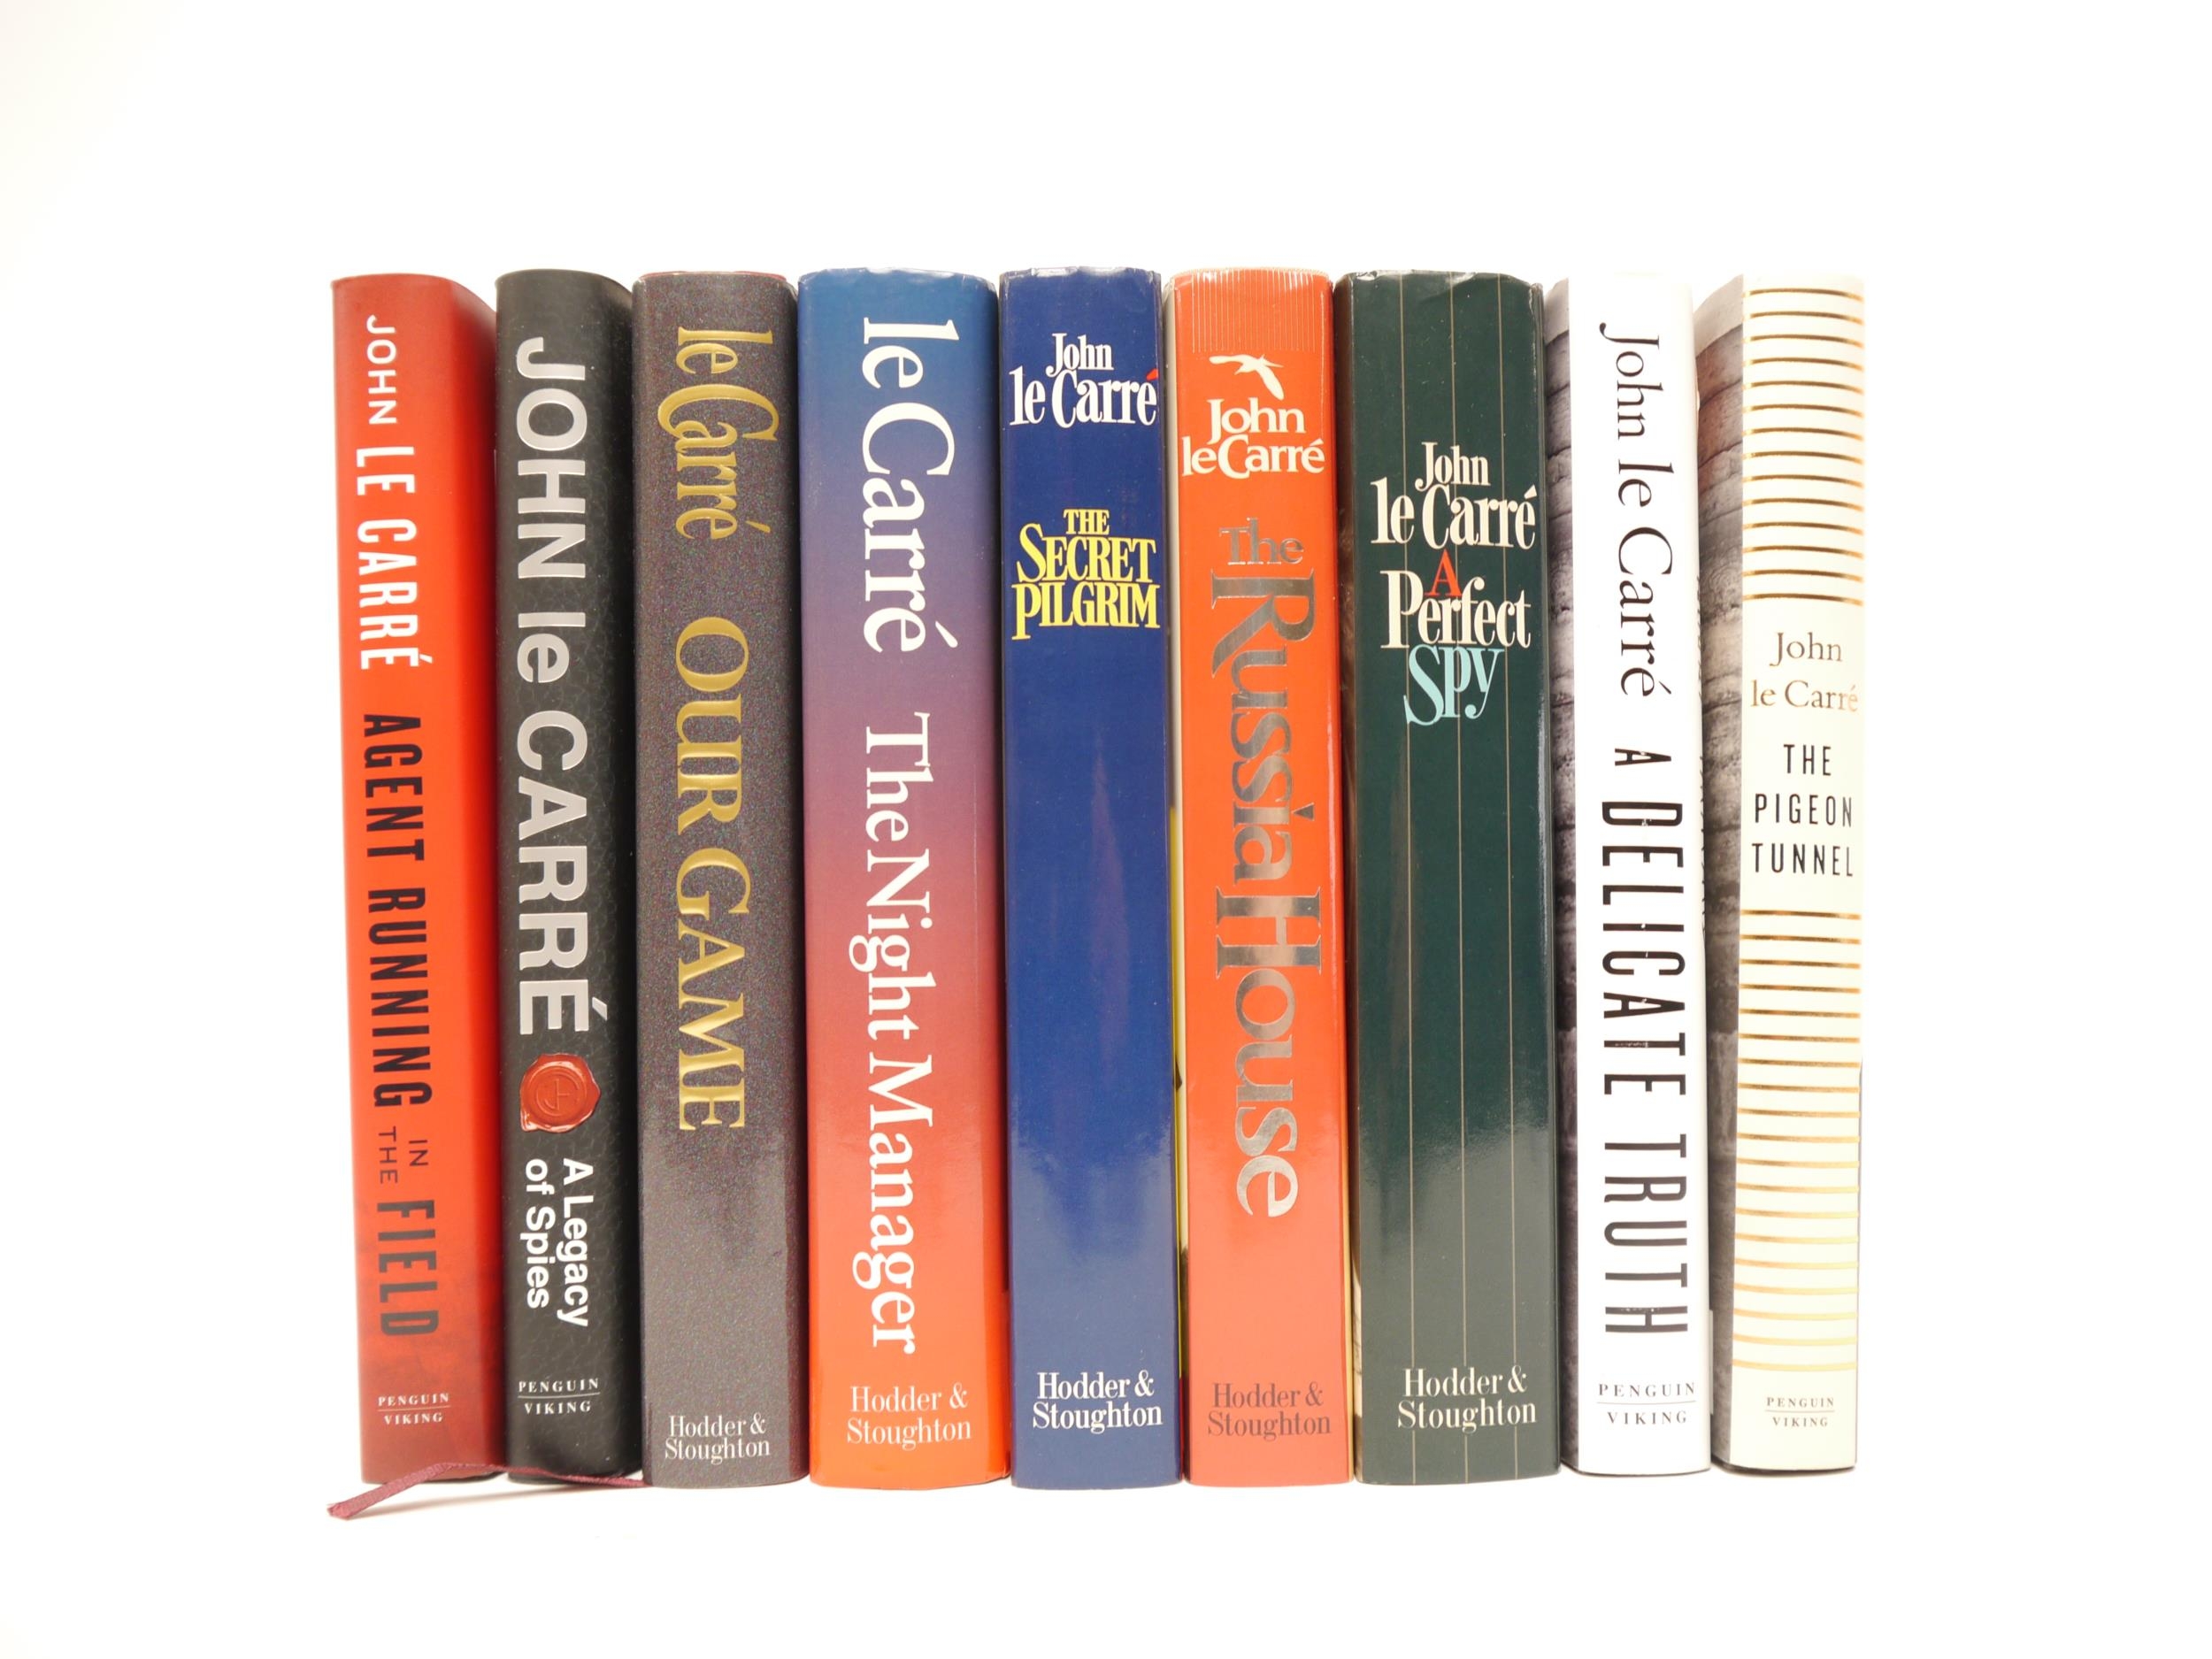 John le Carré, 9 titles, all UK editions published London, Hodder & Stoughton or Viking, all